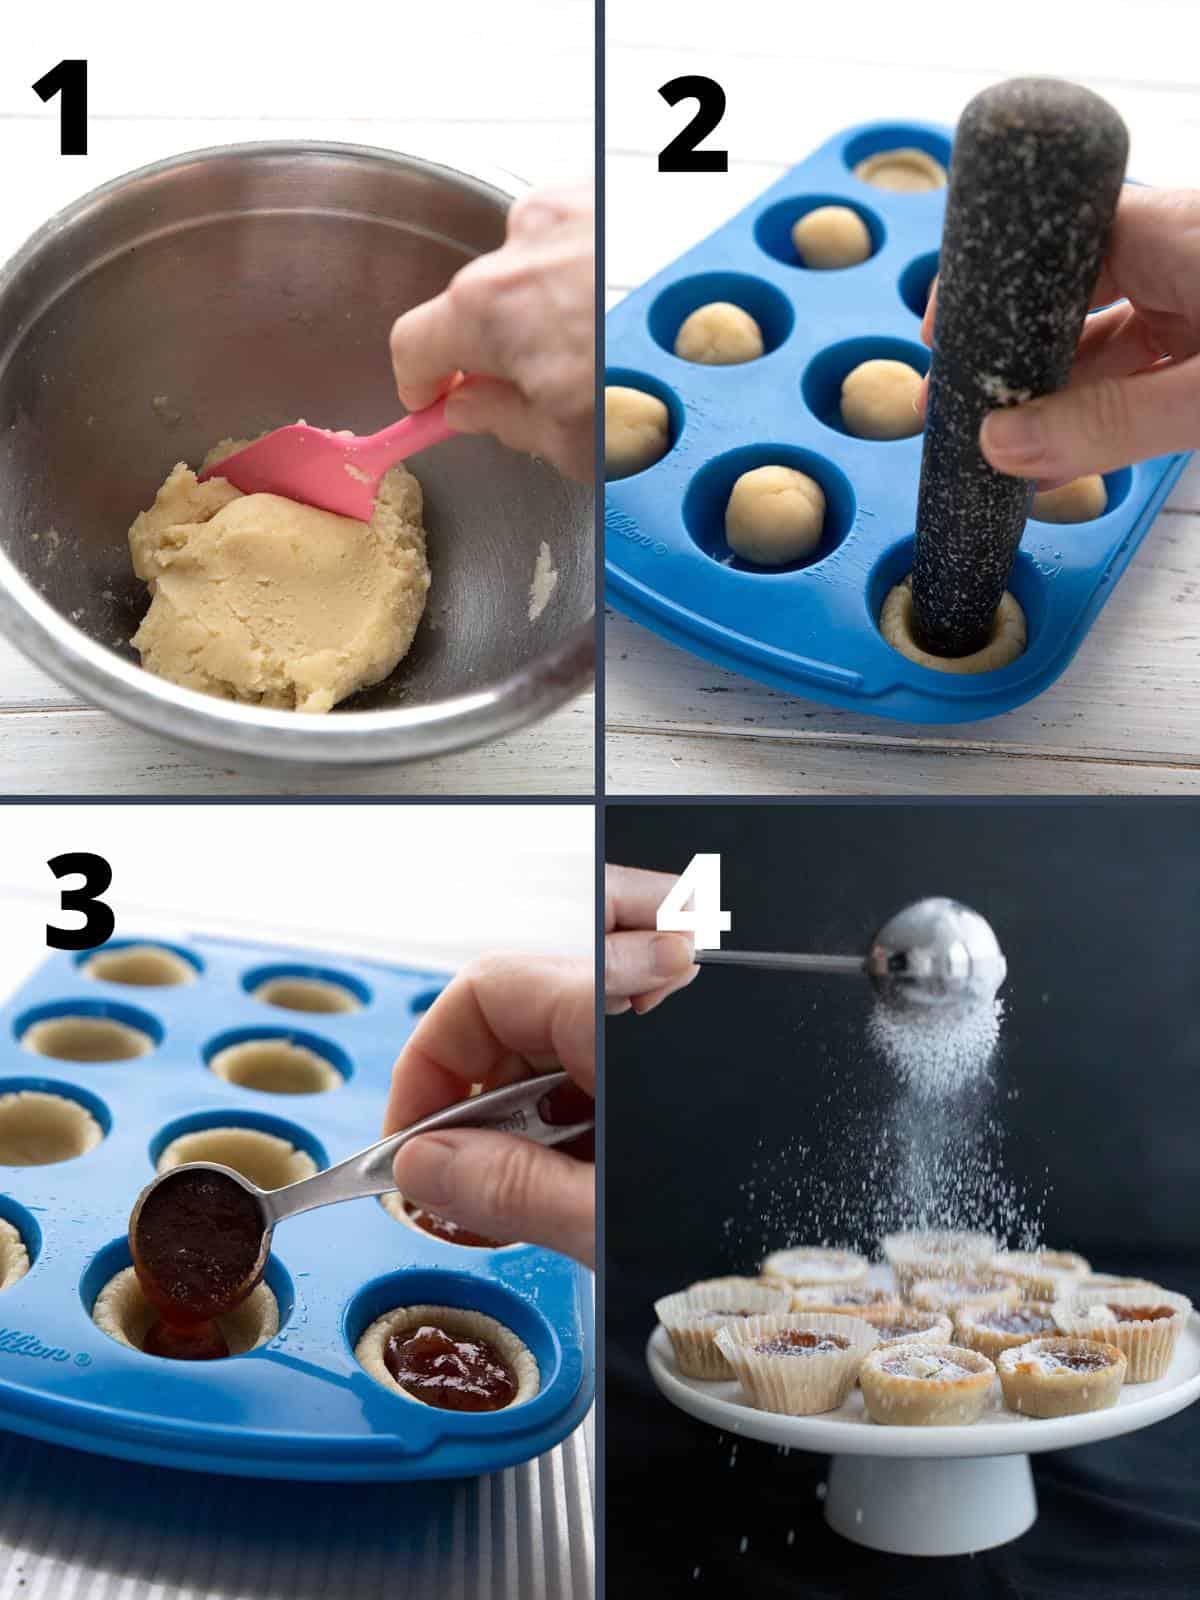 A collage of 4 images showing how to make Keto Jam Tarts.